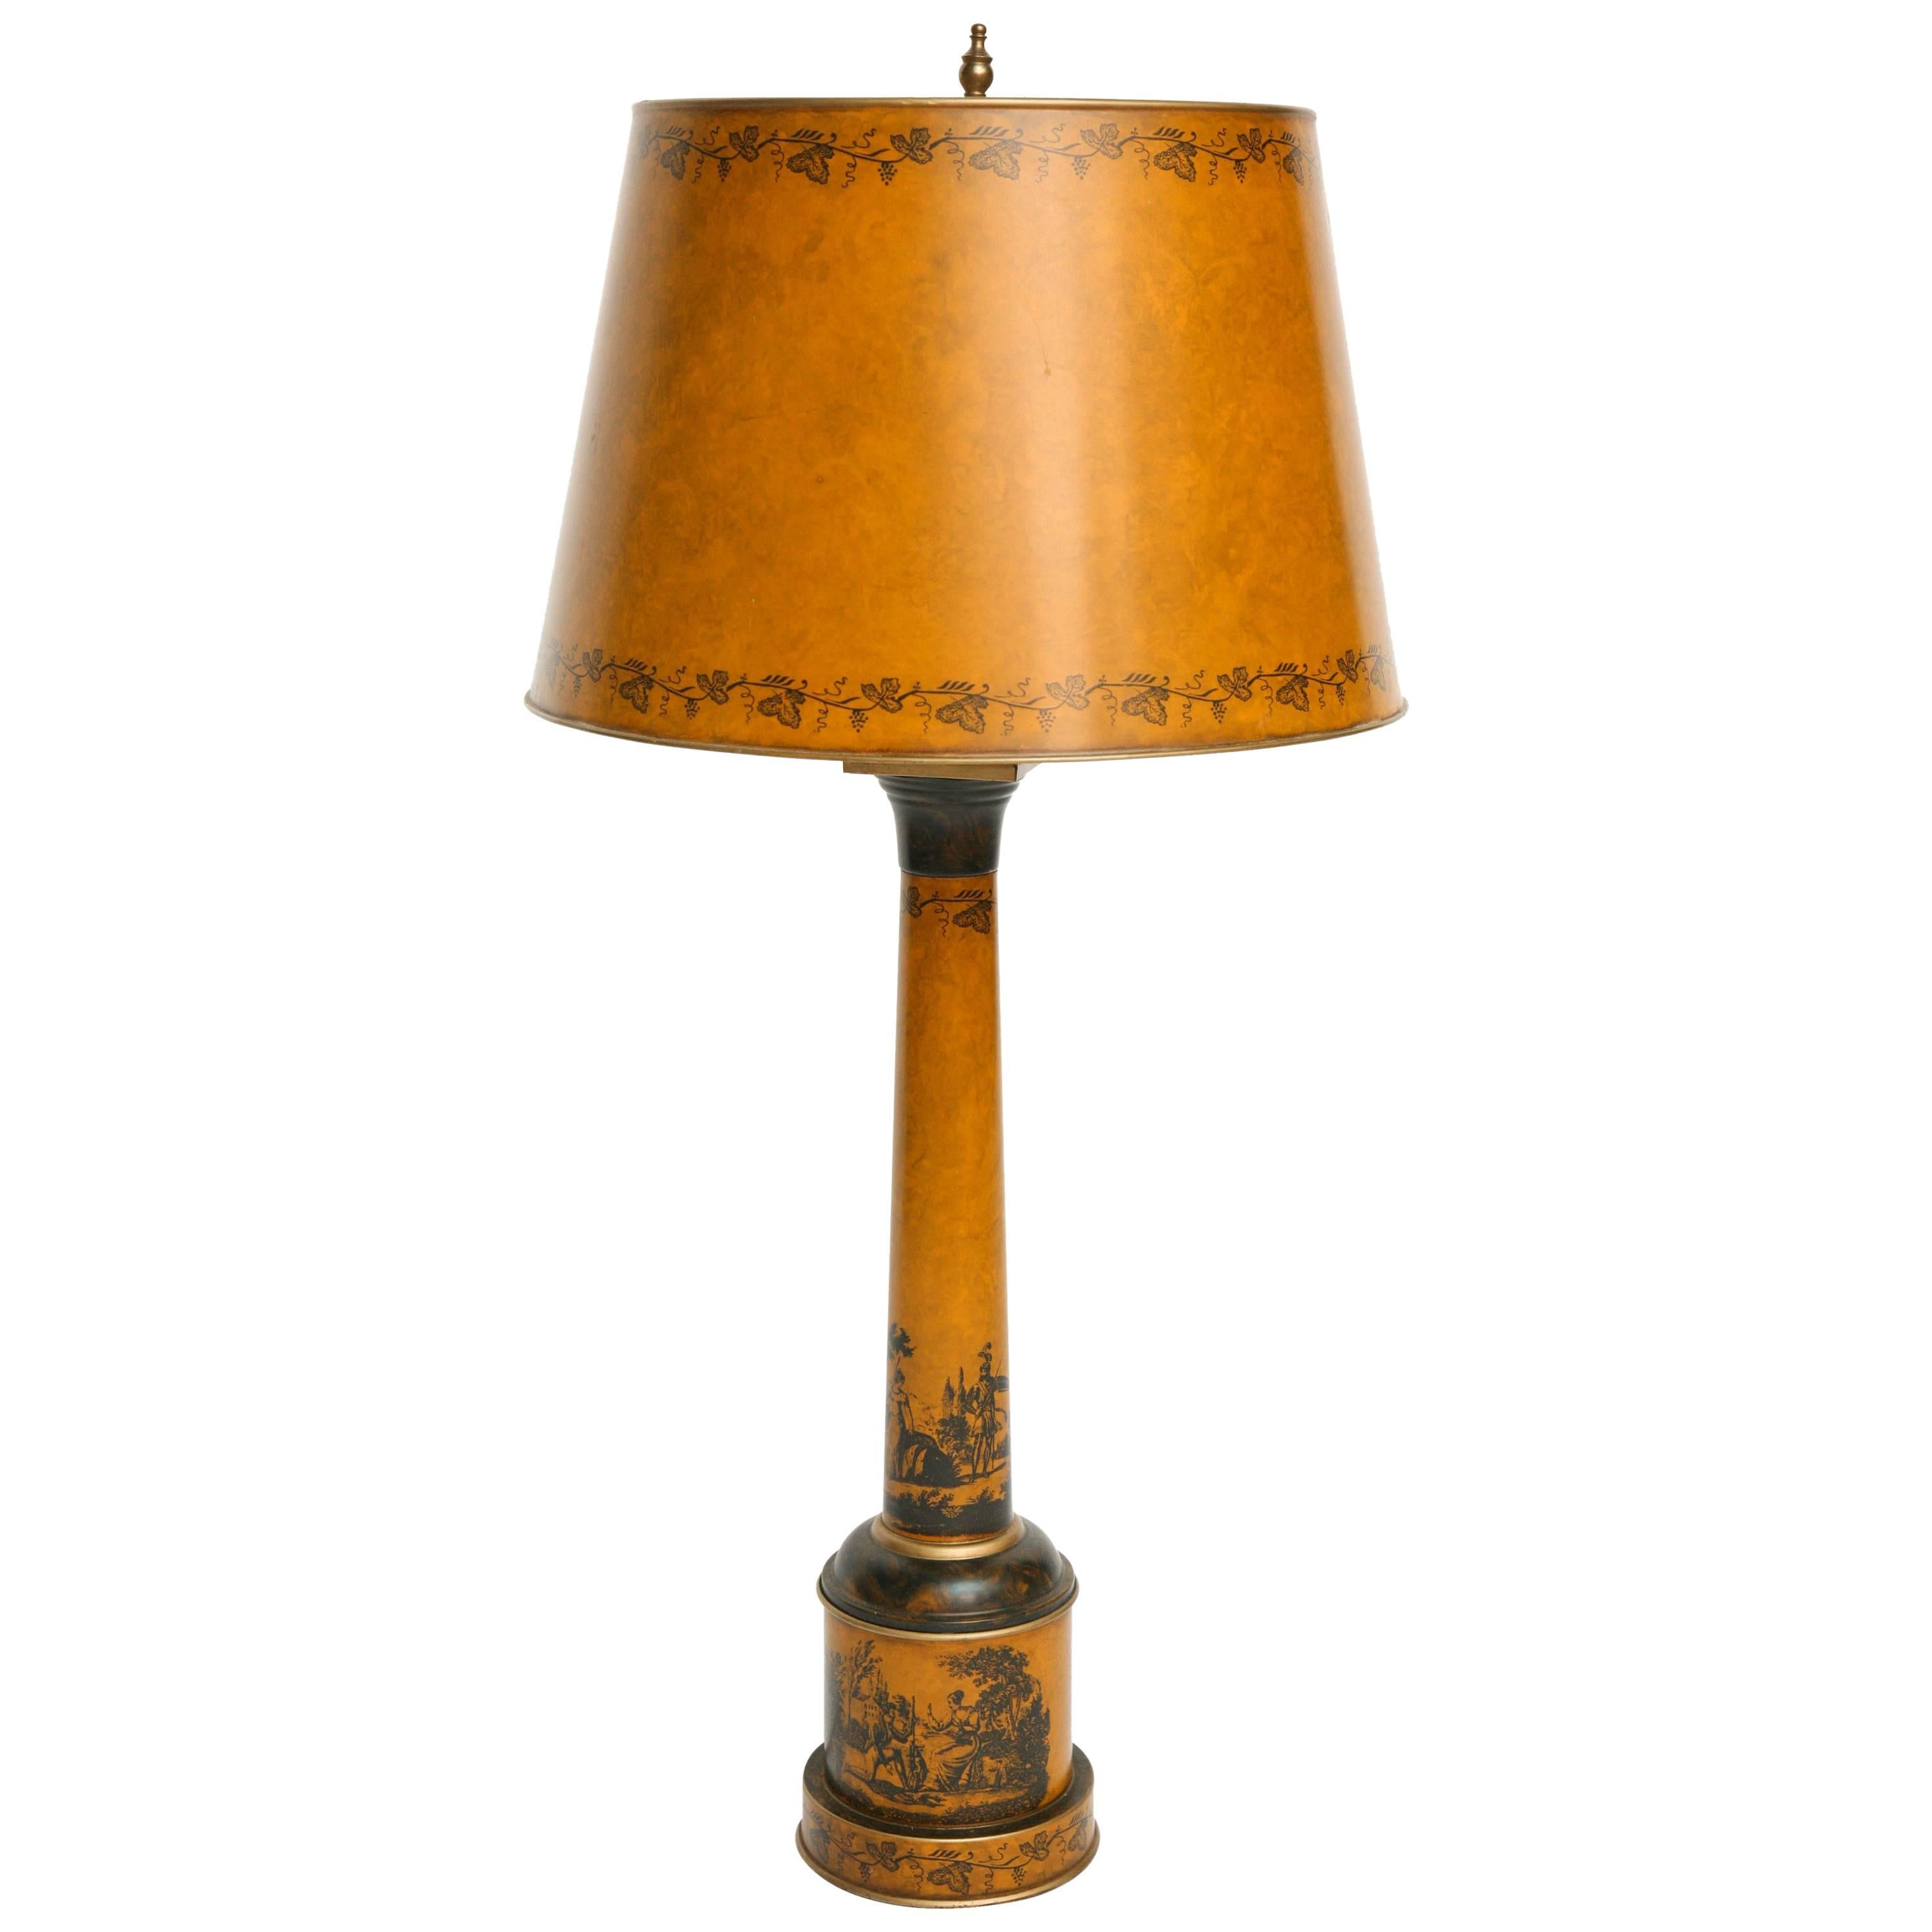 Superb Tole Lamp with Original Tole Shade